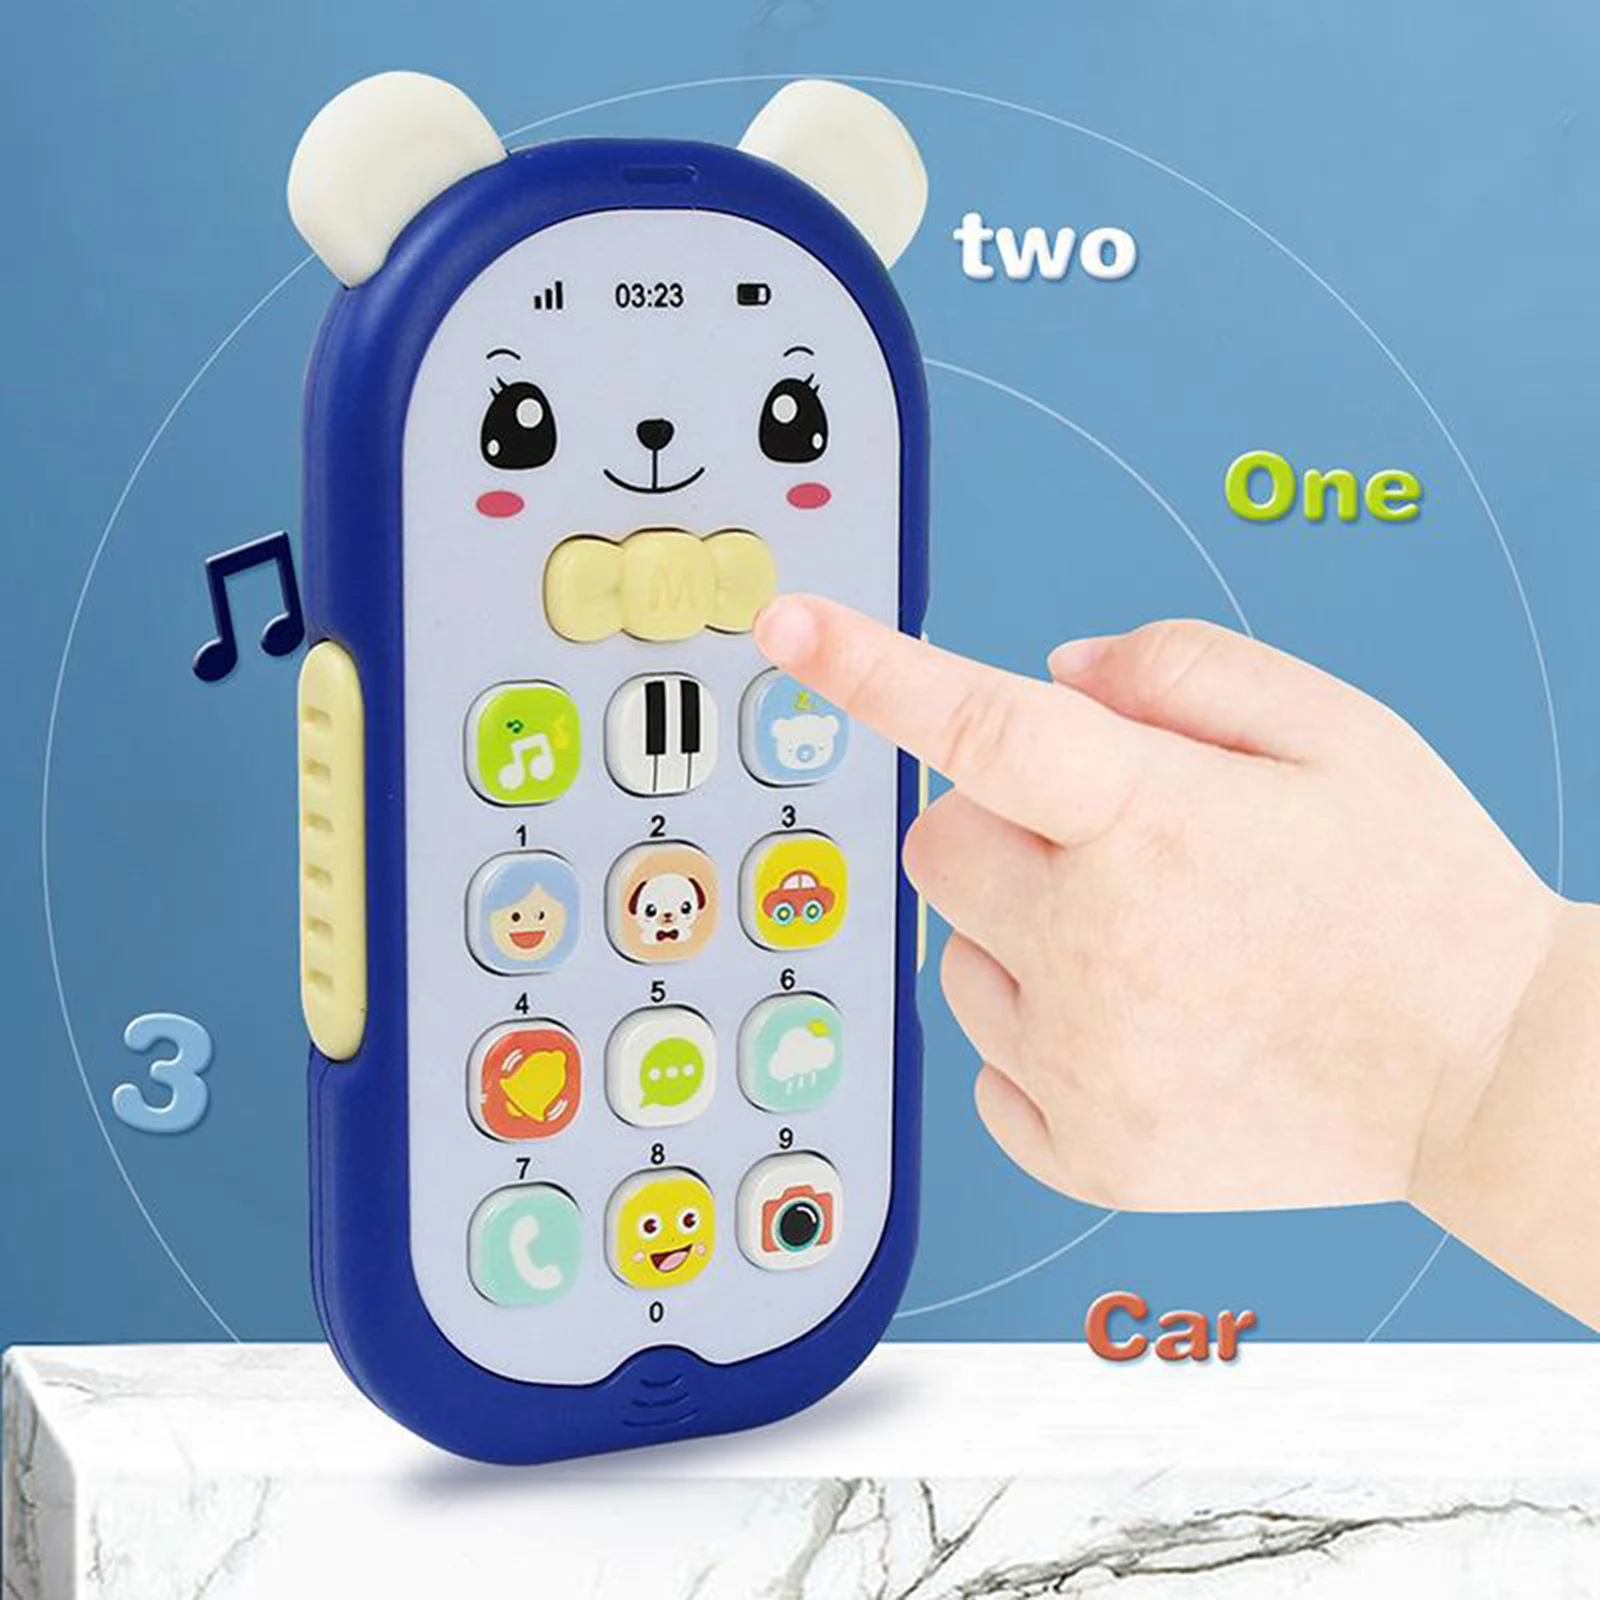 Baby Phone Toy Mobile Telephone Early Educational Learning Machine Kids Gifts